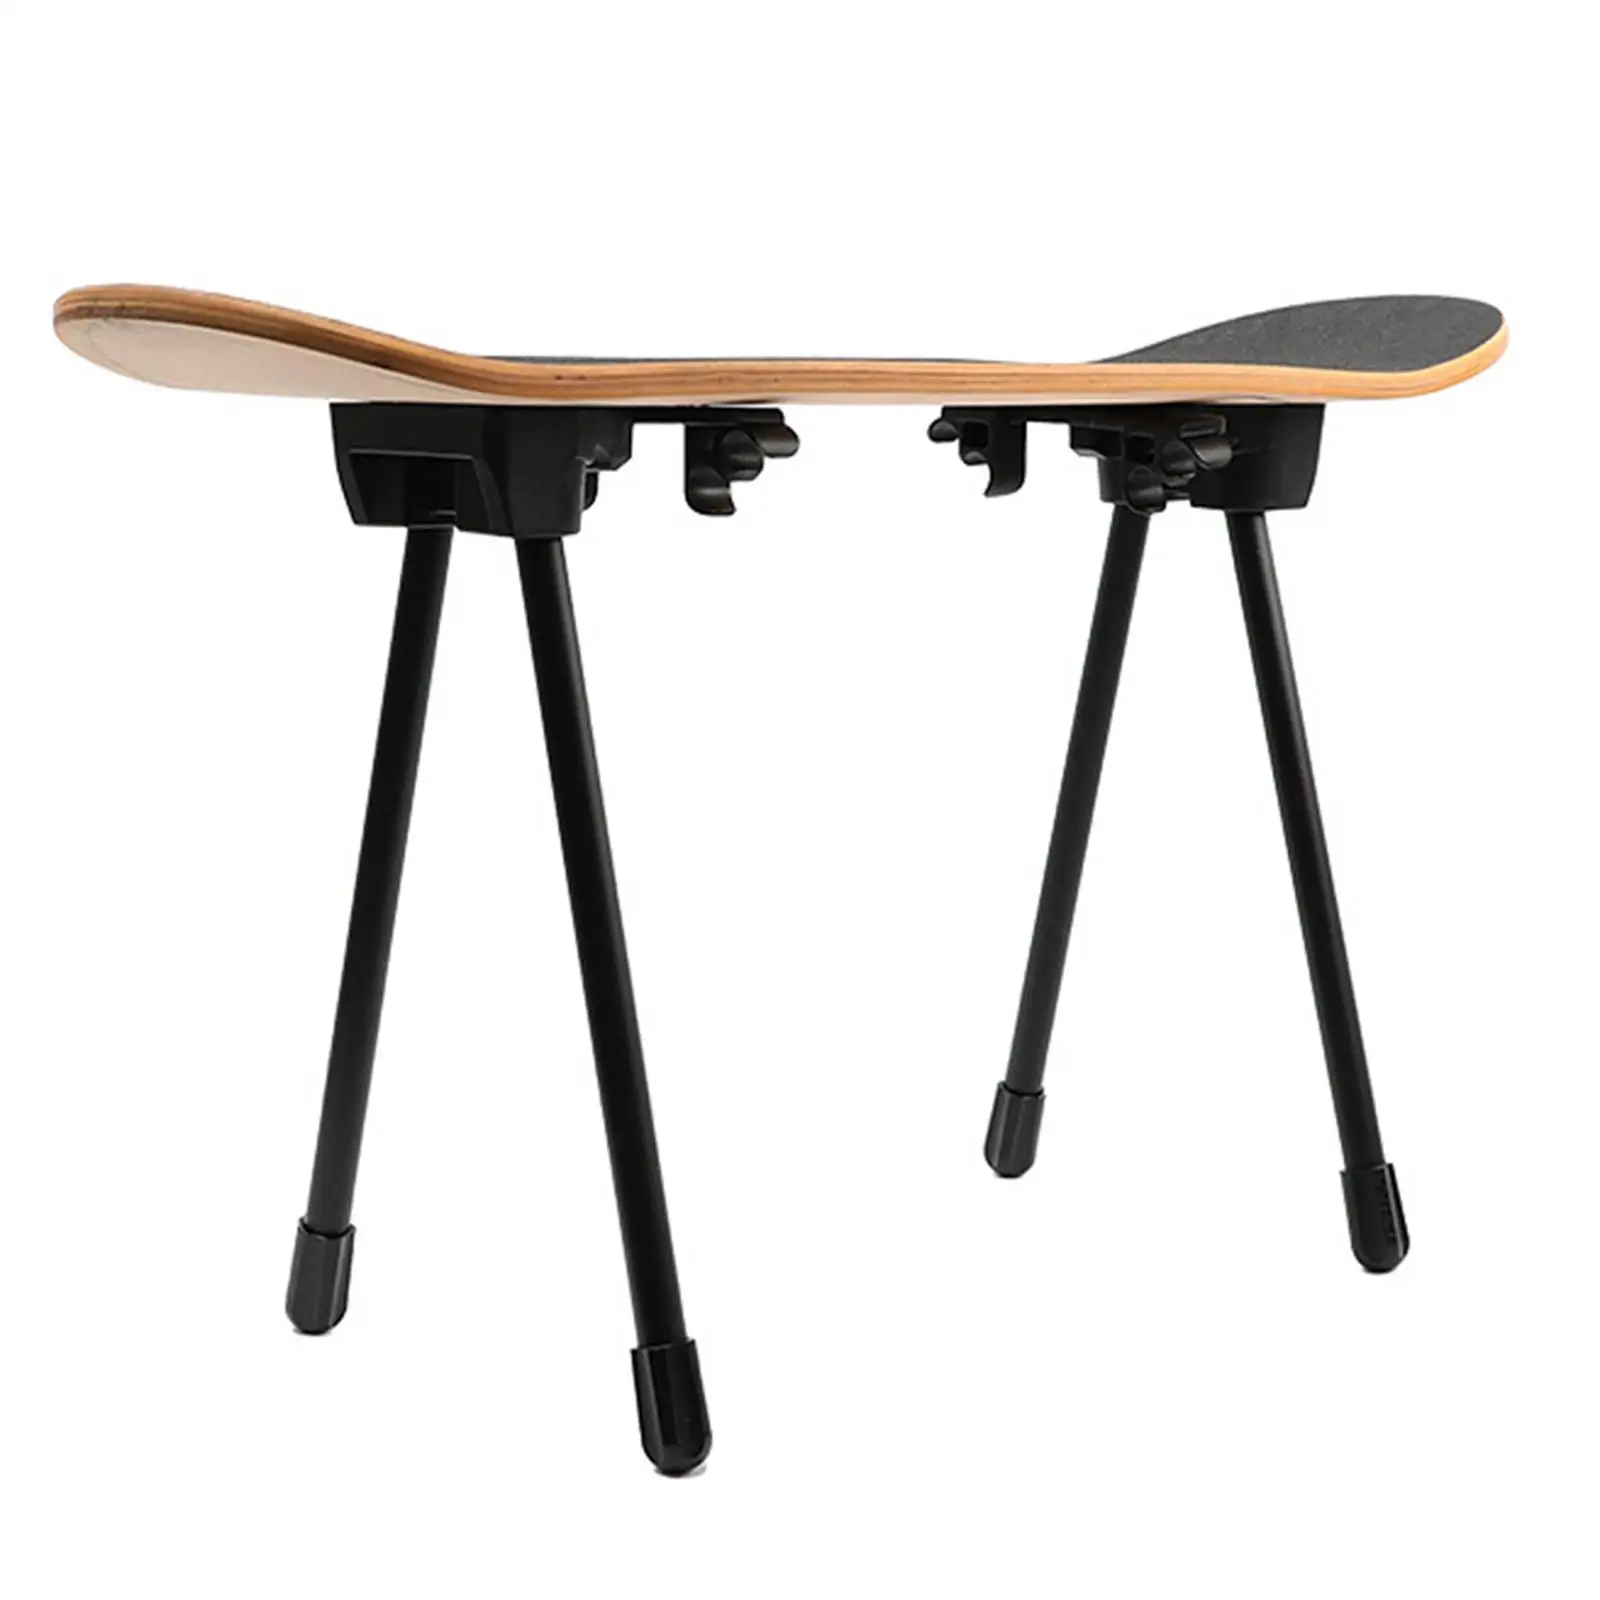 Foldable Camping Table Skateboard Foot DIY Furniture Legs Sturdy Portable with Screws Board Fixture Skateboard Camping Equipment